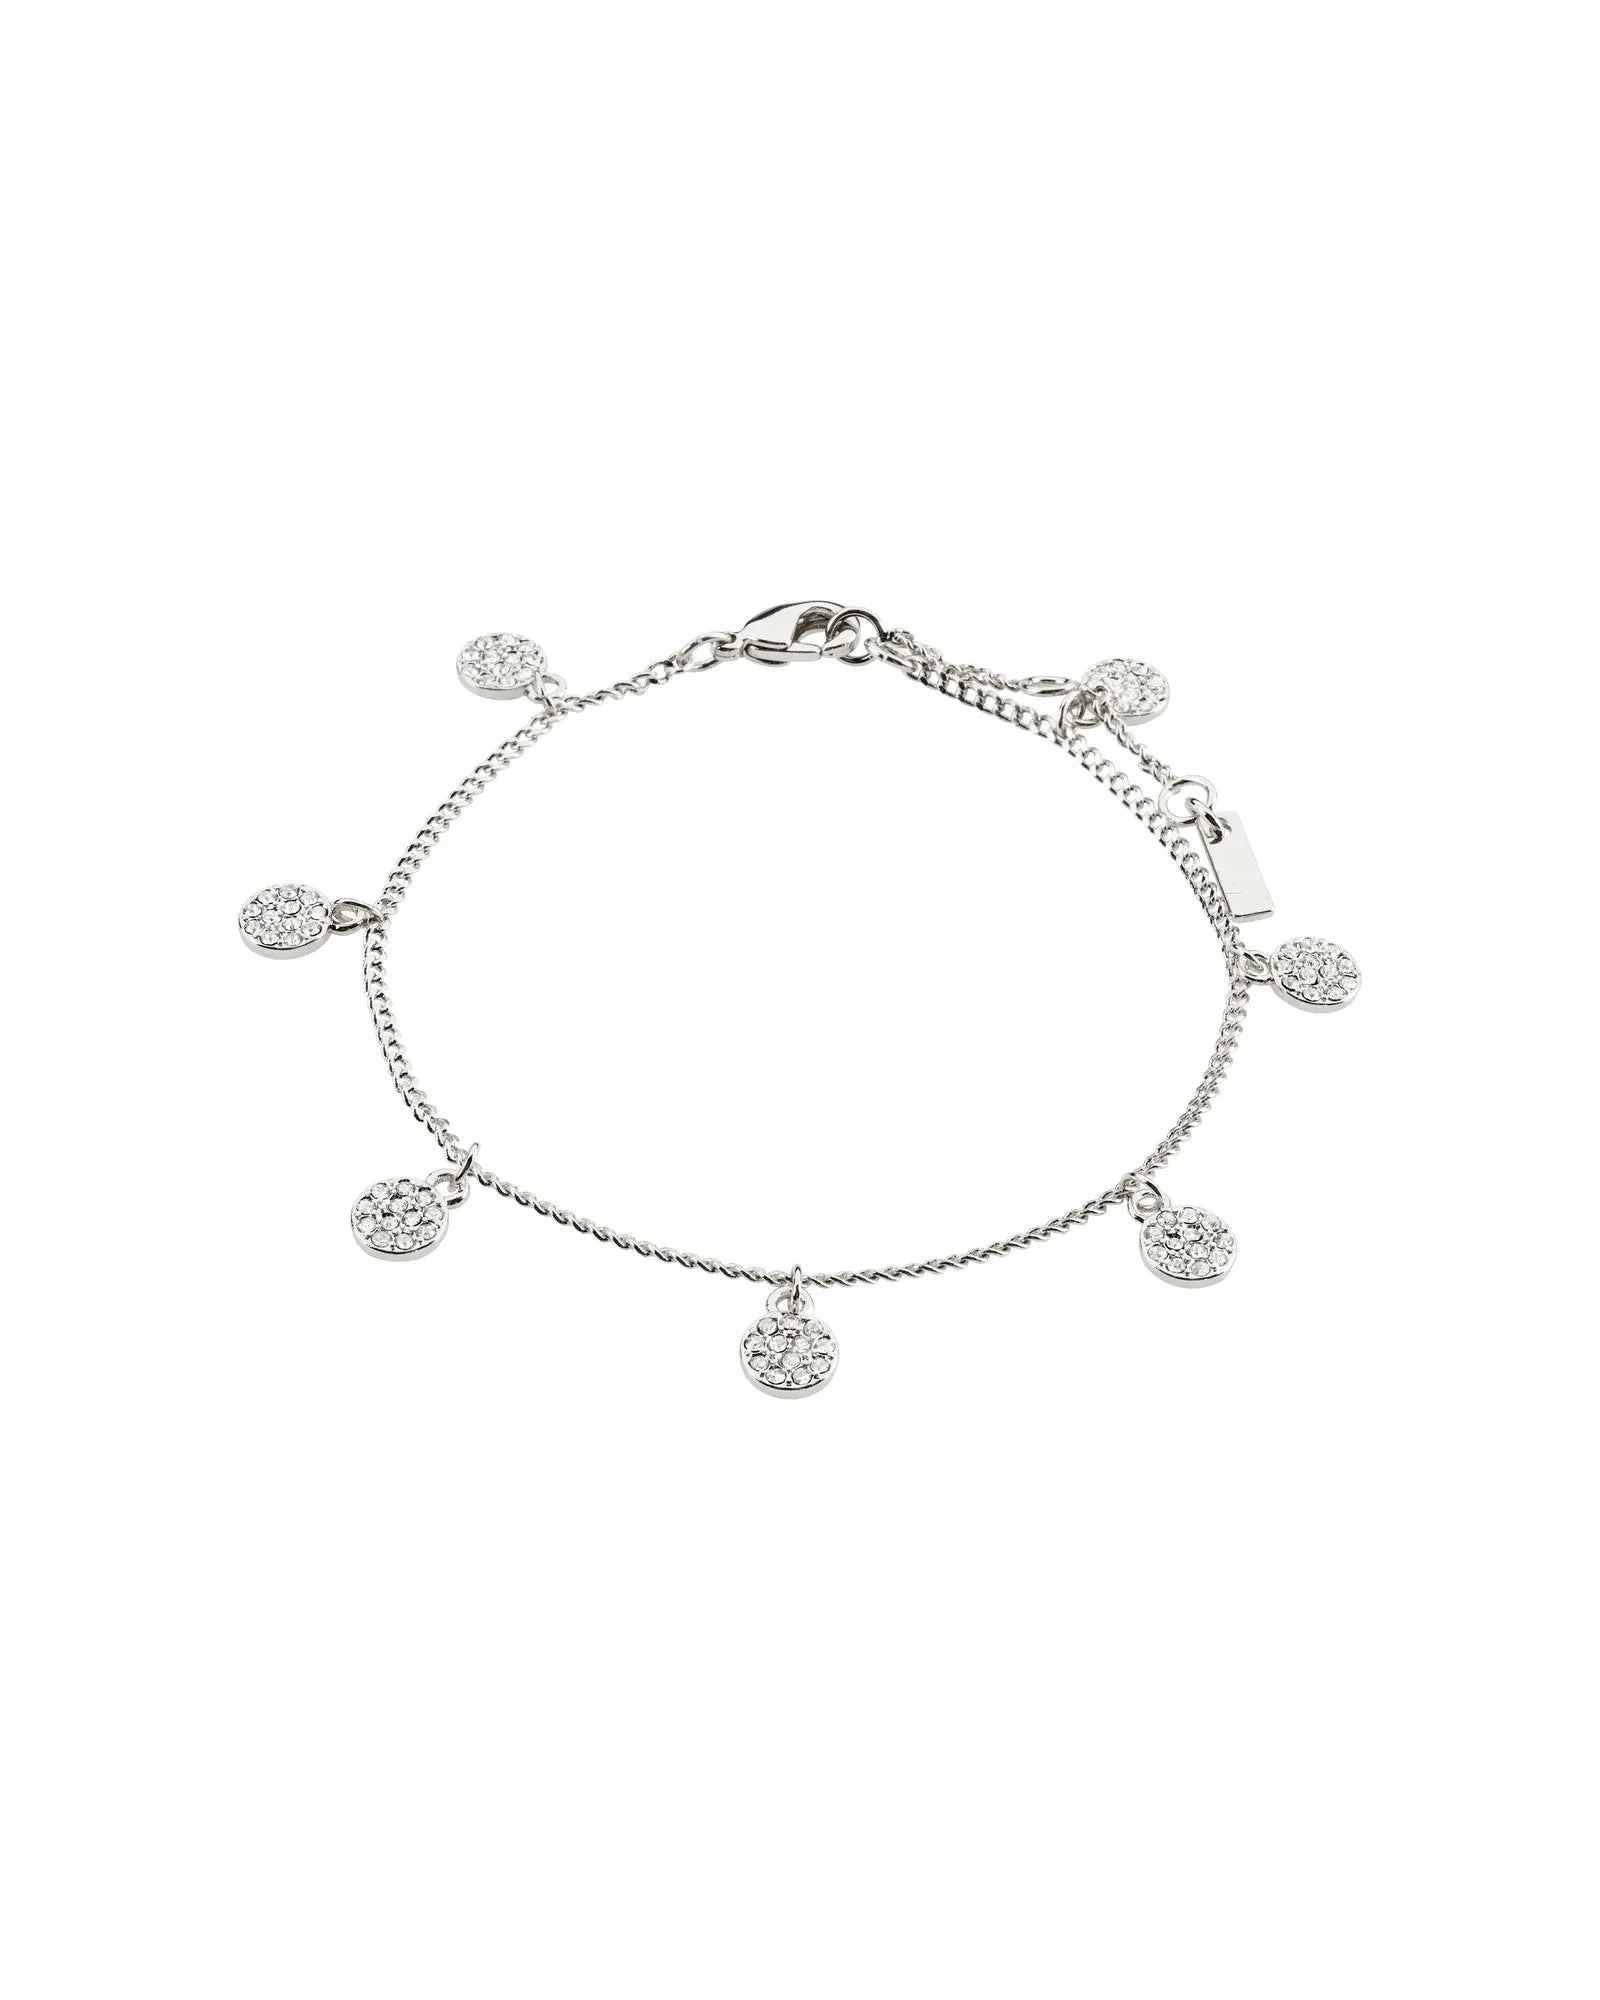 CHAYENNE Recycled Crystal Bracelet - Silver Plated